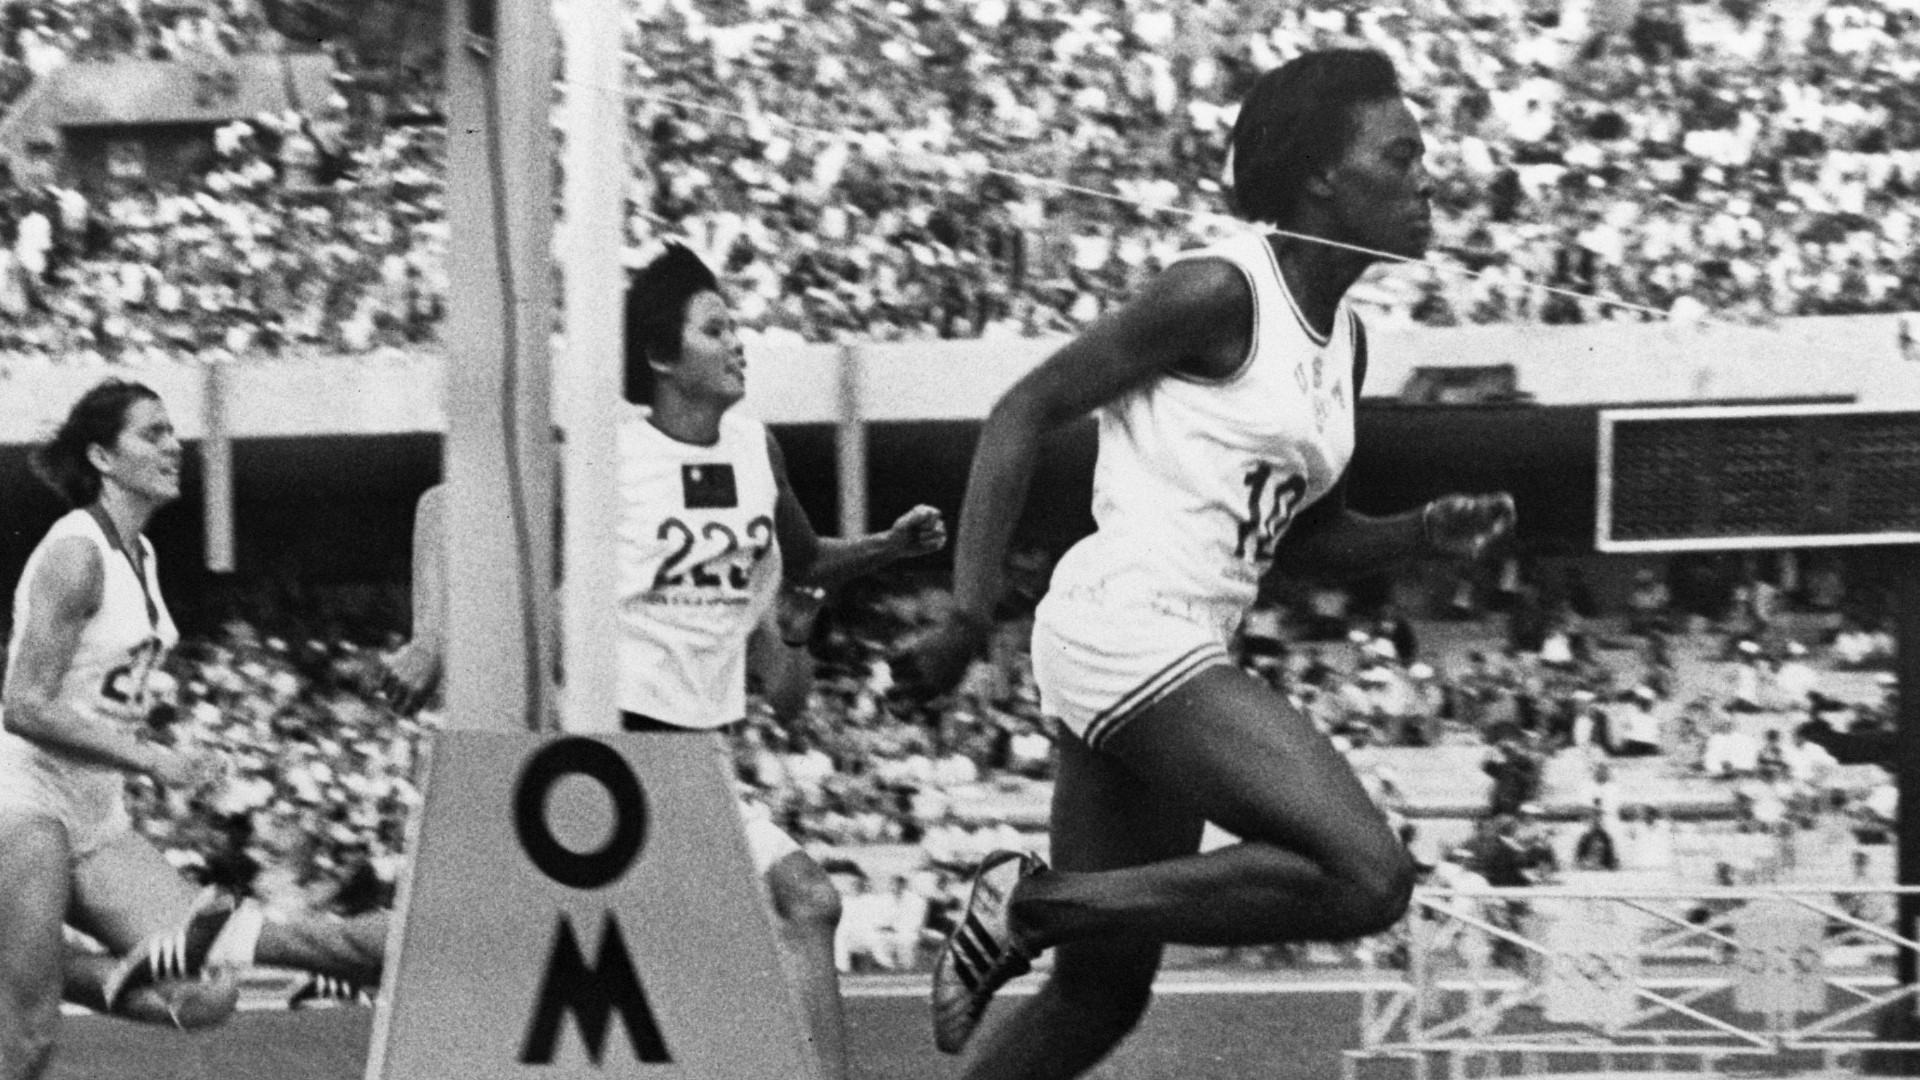 The Griffin, Georgia native was the first person to win consecutive gold medals in the 100-meter sprint and protested racial injustice while doing it.